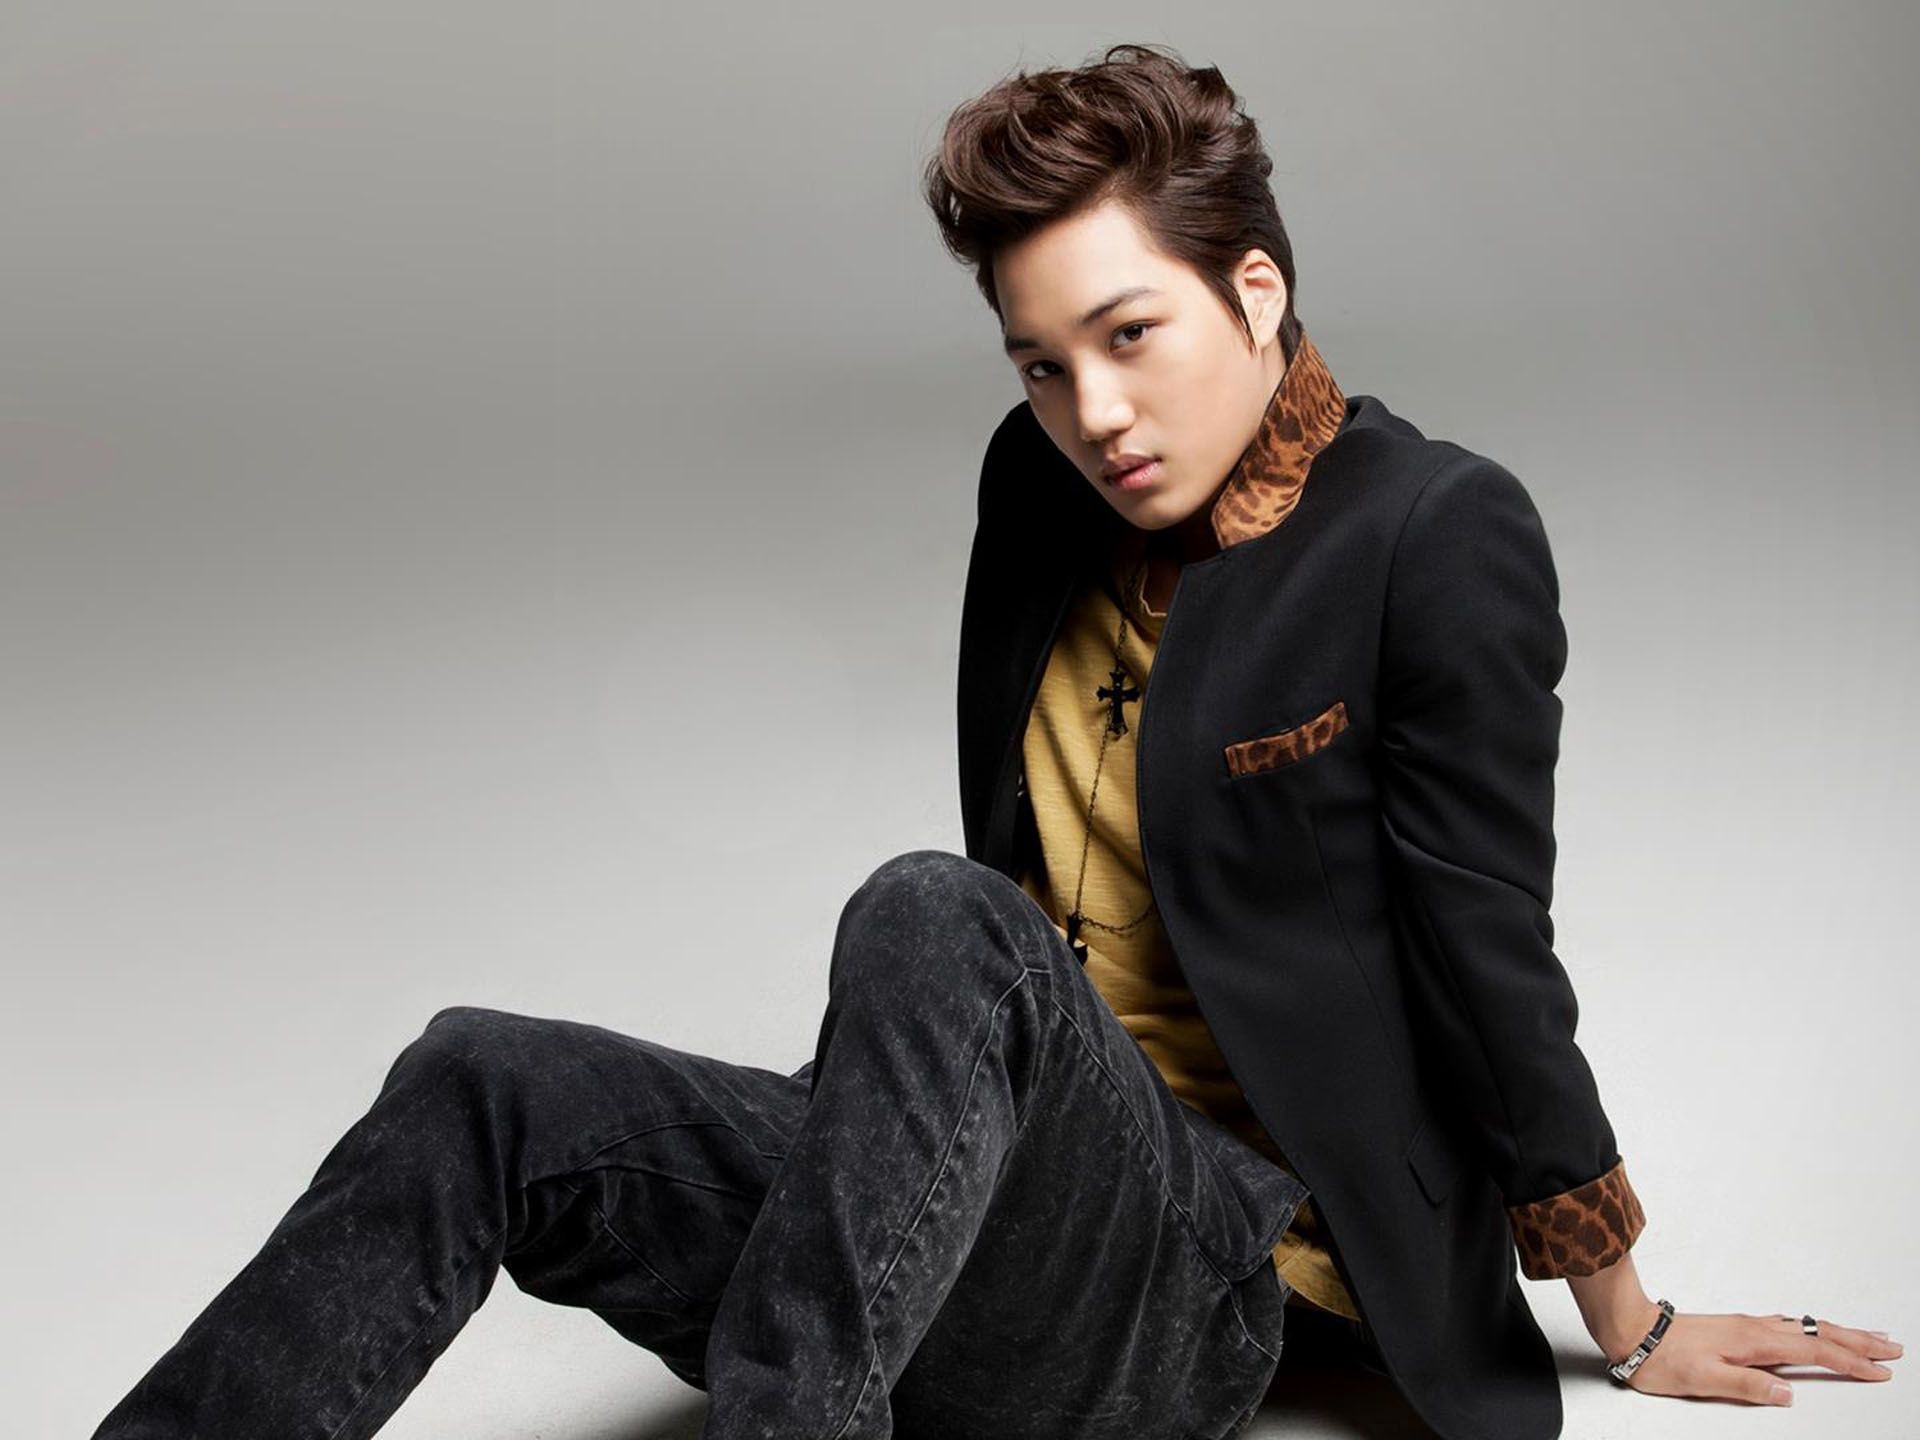 1920x1440 HD Wallpaper and background photos of â¥Kaiâ¥ for fans of KAI (EXO-K) images.